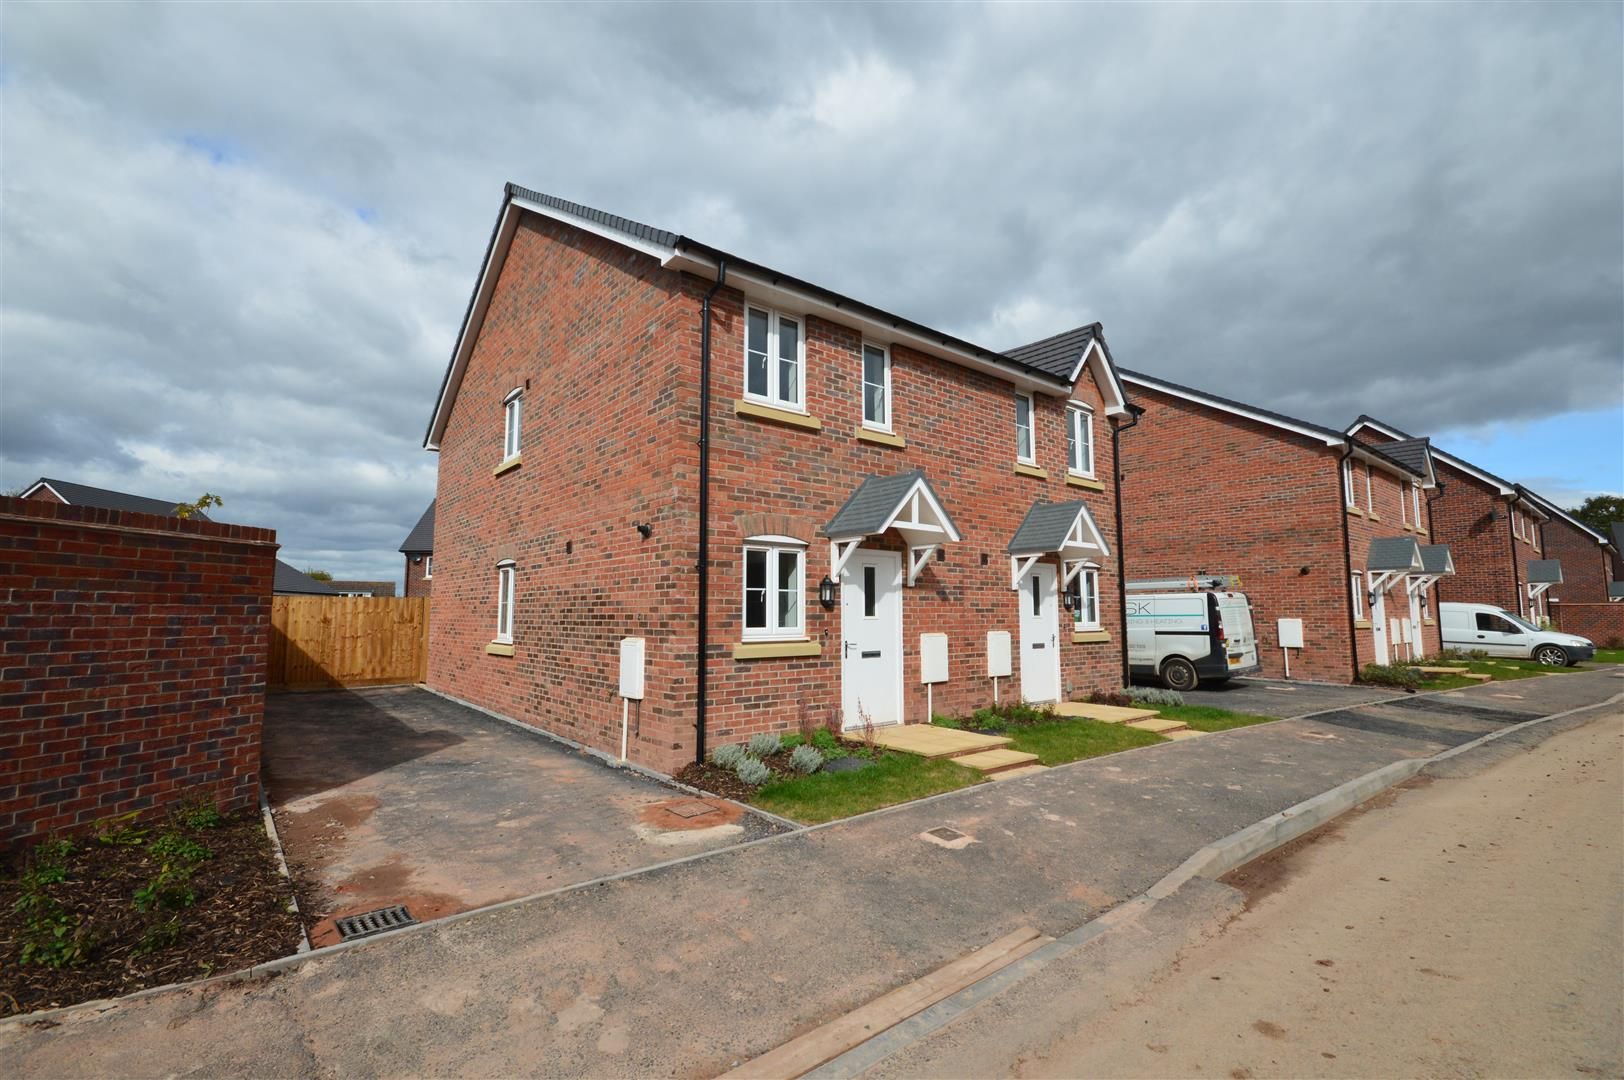 2 bed semi-detached for sale in Kingstone - Property Image 1